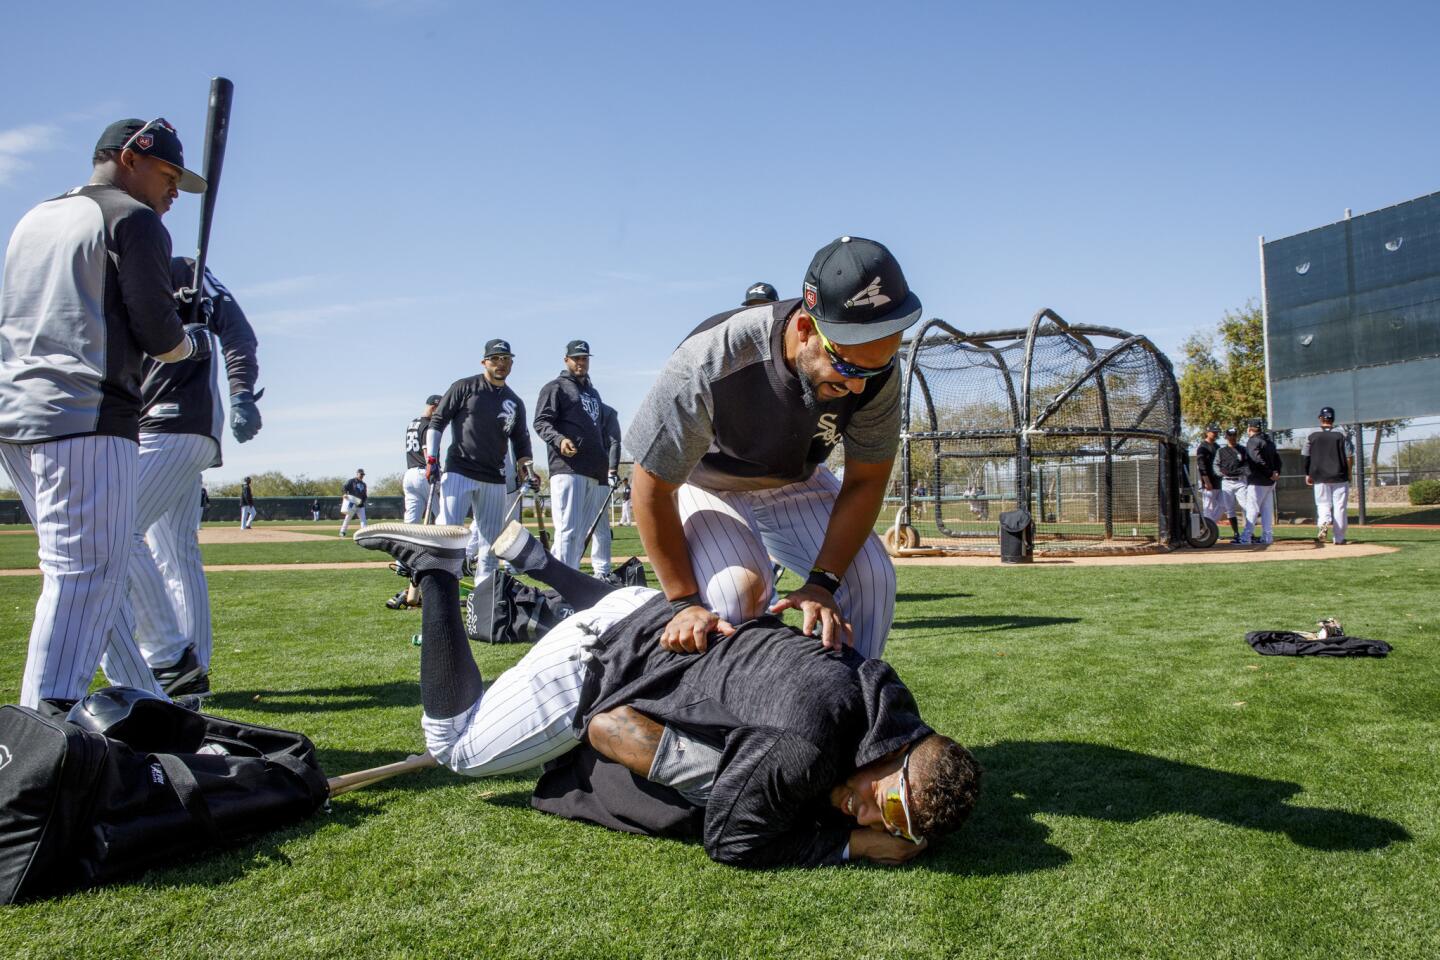 Jose Abreu and Yoan Moncada jump on Tim Anderson after practice during White Sox spring training at Camelback Ranch on Feb. 21, 2018.